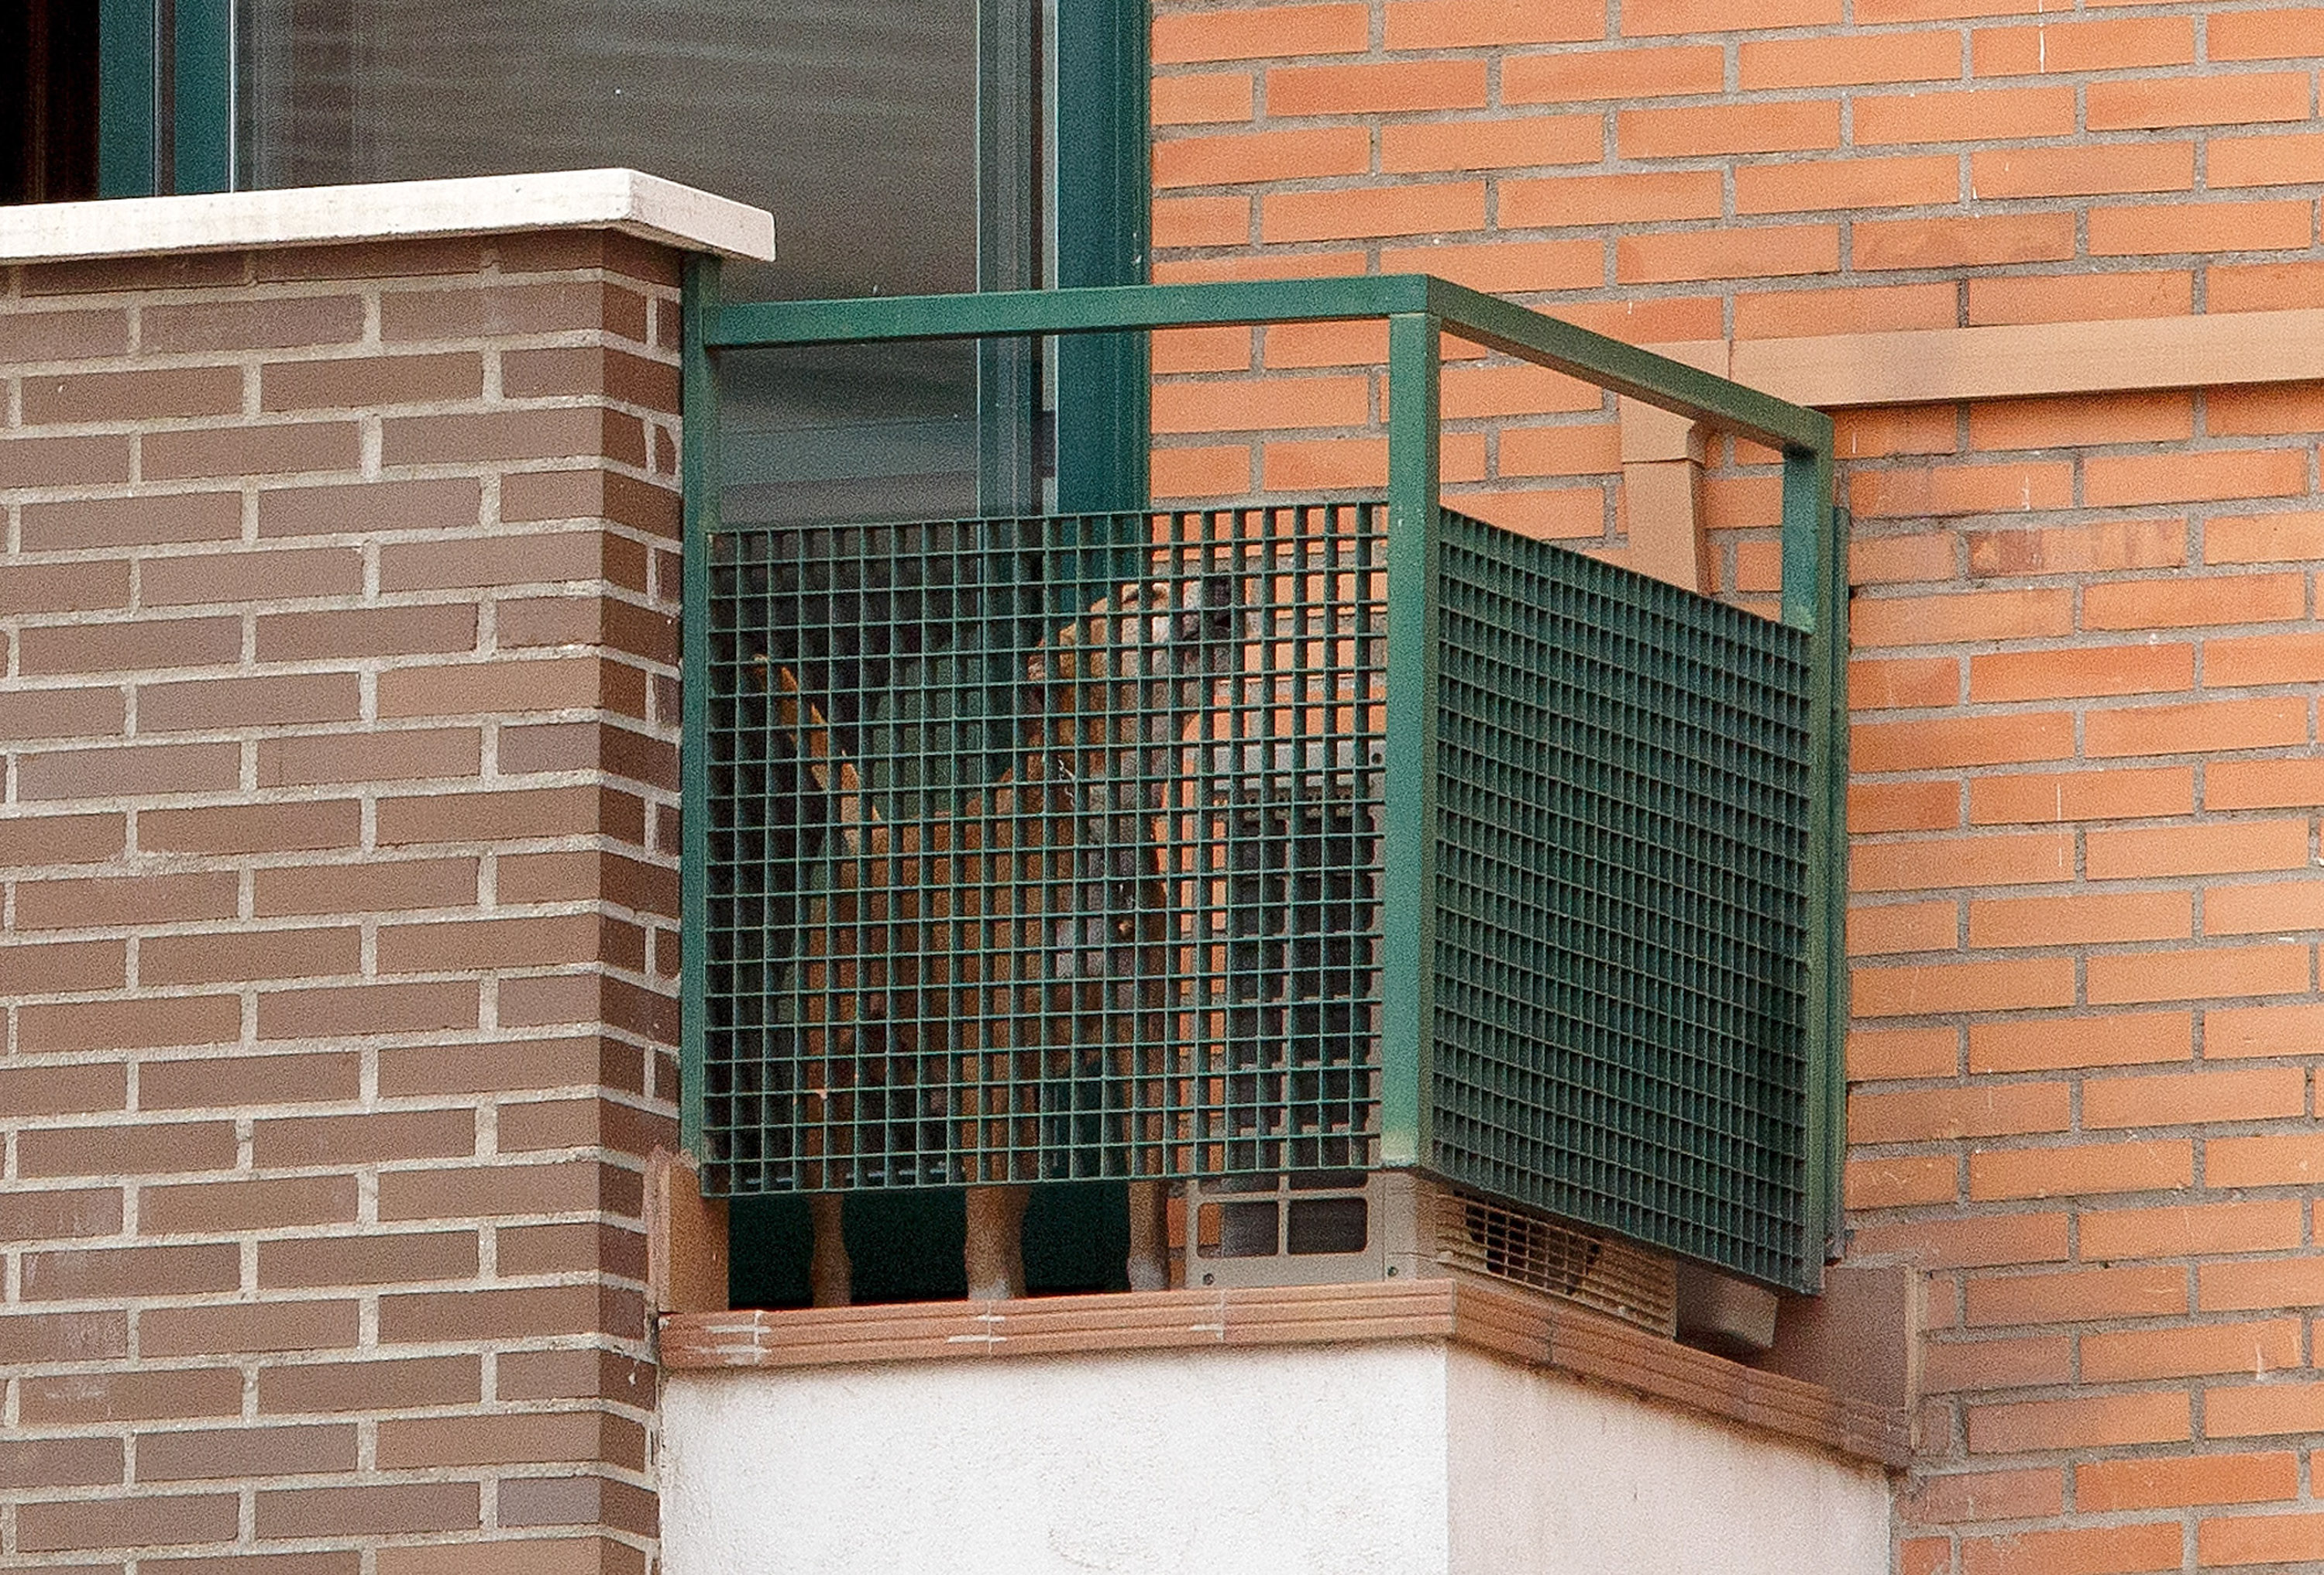 'Excalibur' barks from the balcony of the private residence for the Spanish nurse who has tested positive for the Ebola virus on October 8, 2014 in Alcorcon, Spain. (Pablo Blazquez Dominguez—Getty Images)